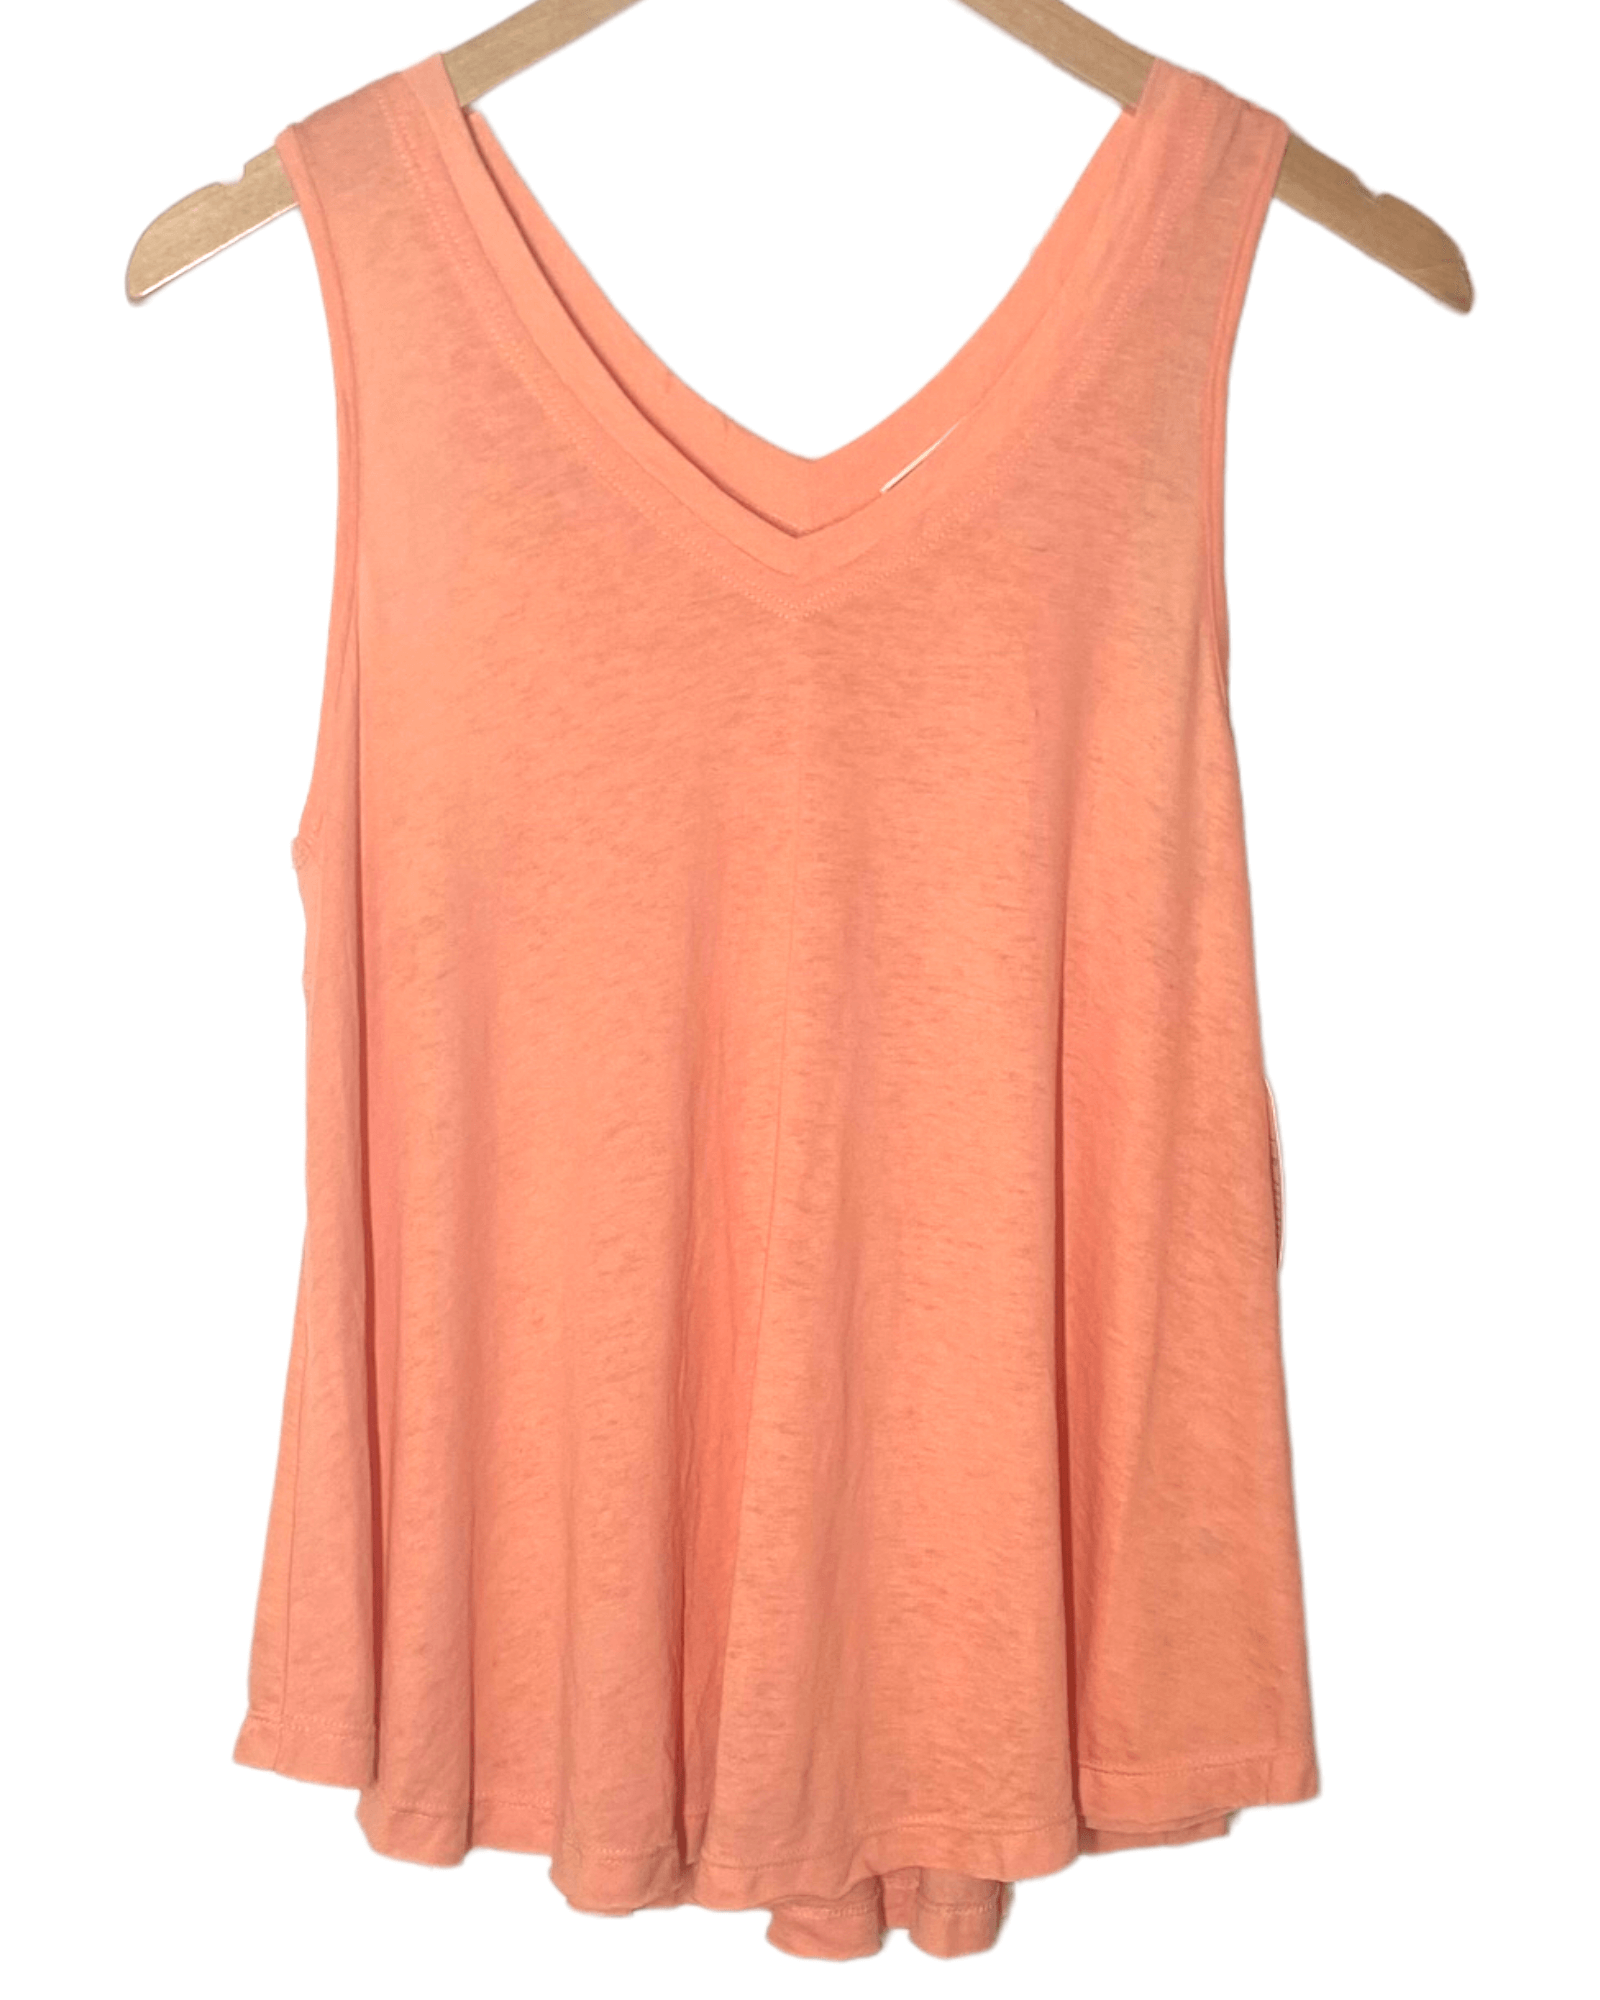 Soft Autumn MELROSE AND  MARKET coral knit swing top